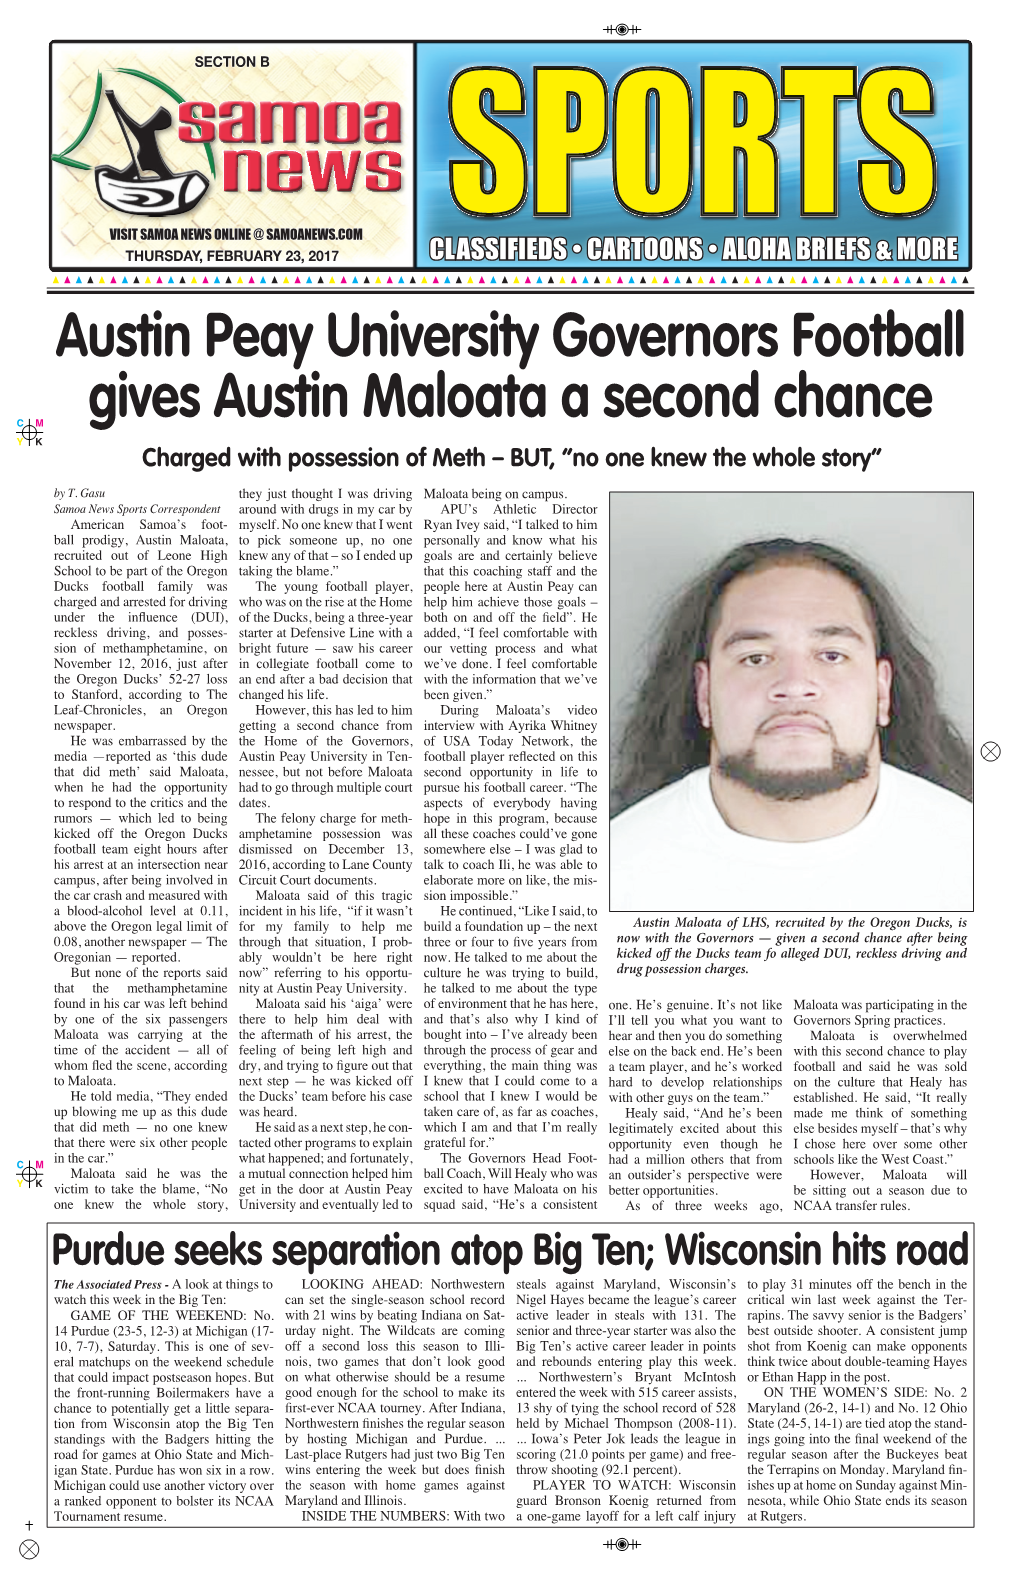 Austin Peay University Governors Football Gives Austin Maloata a Second Chance C M Y K Charged with Possession of Meth – BUT, “No One Knew the Whole Story”